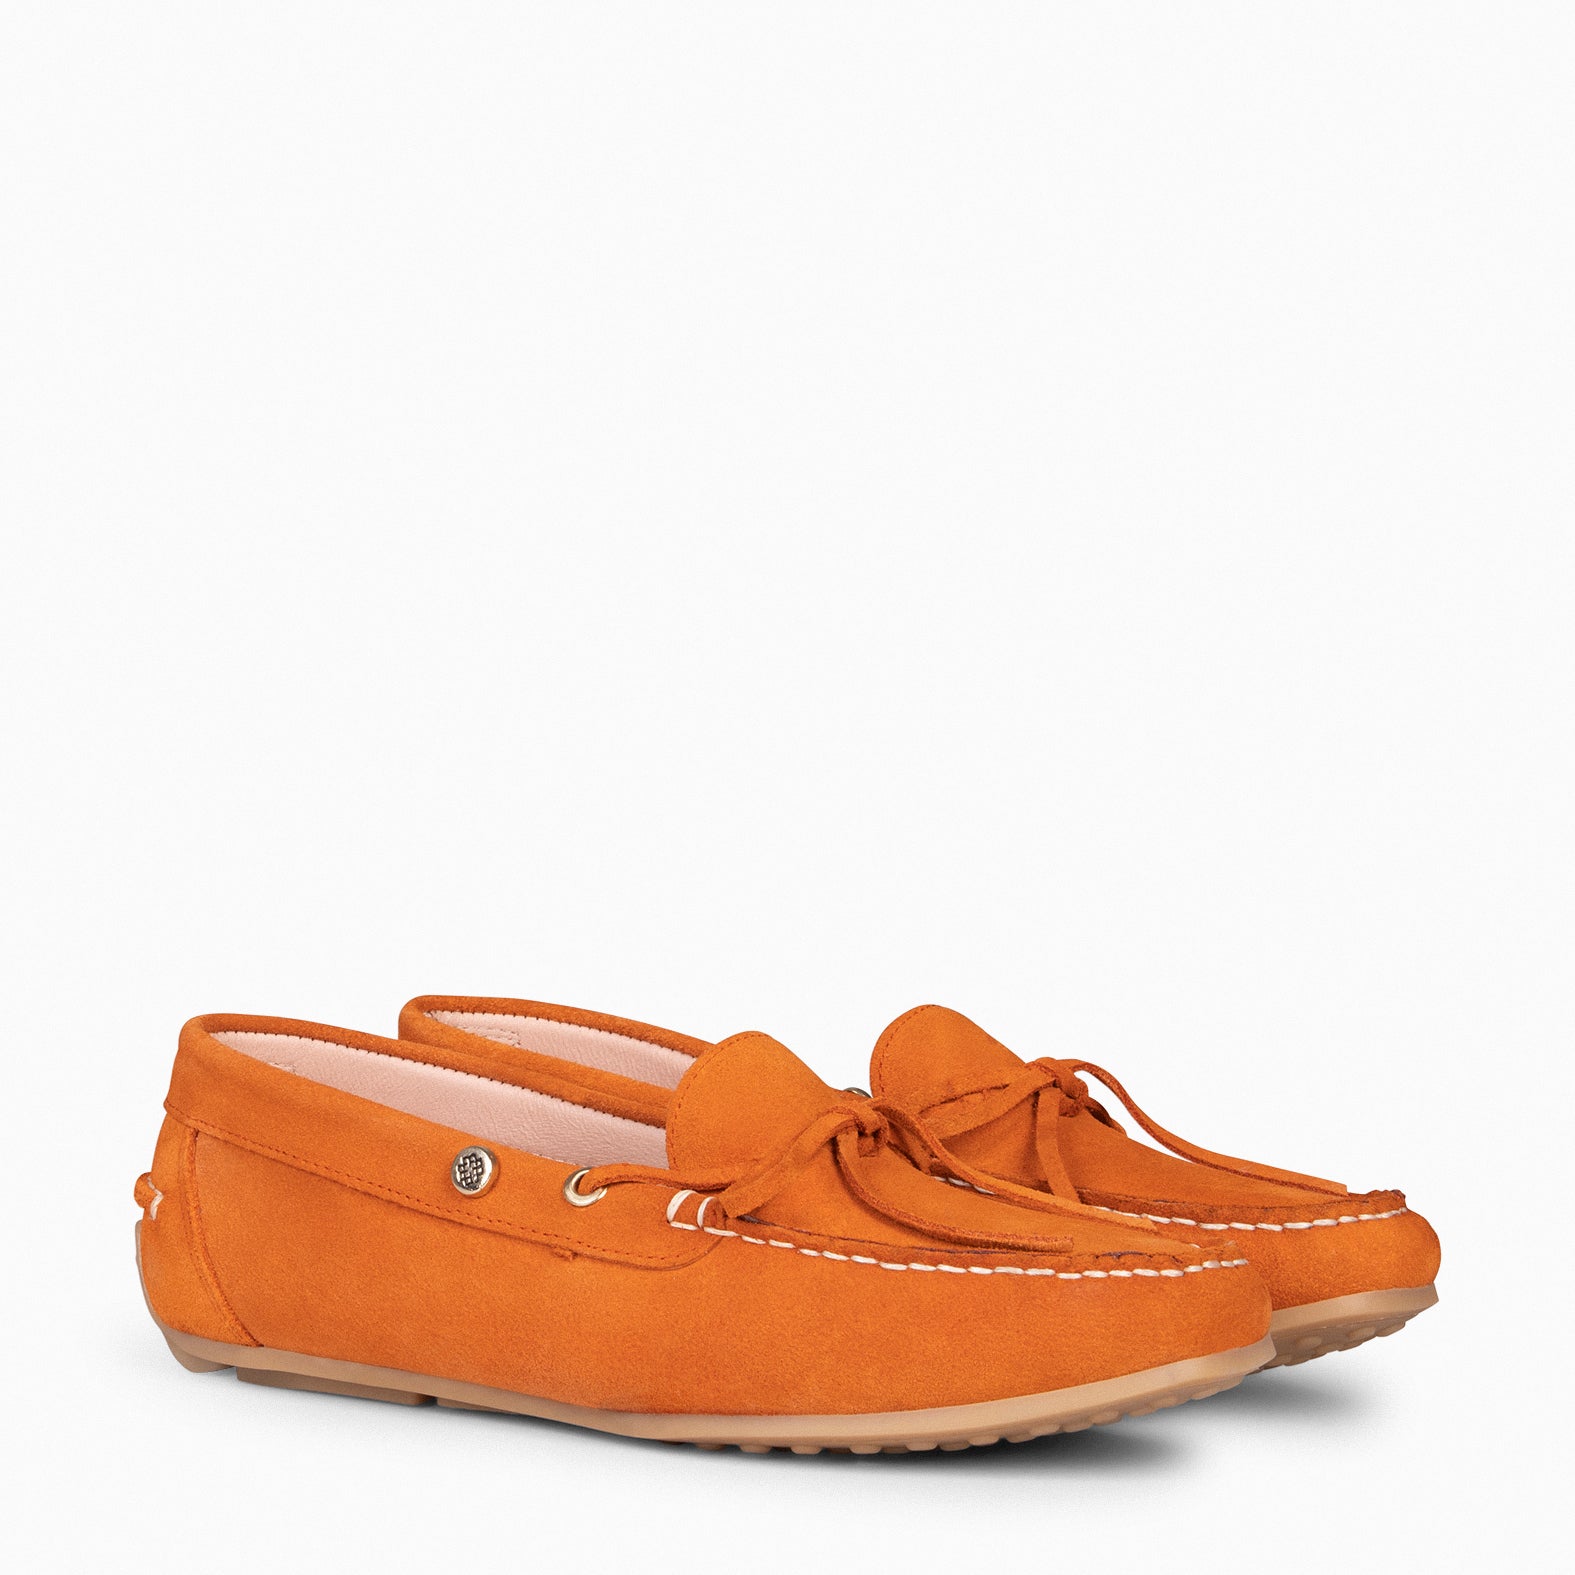 LACE – ORANGE moccasins with removable insole